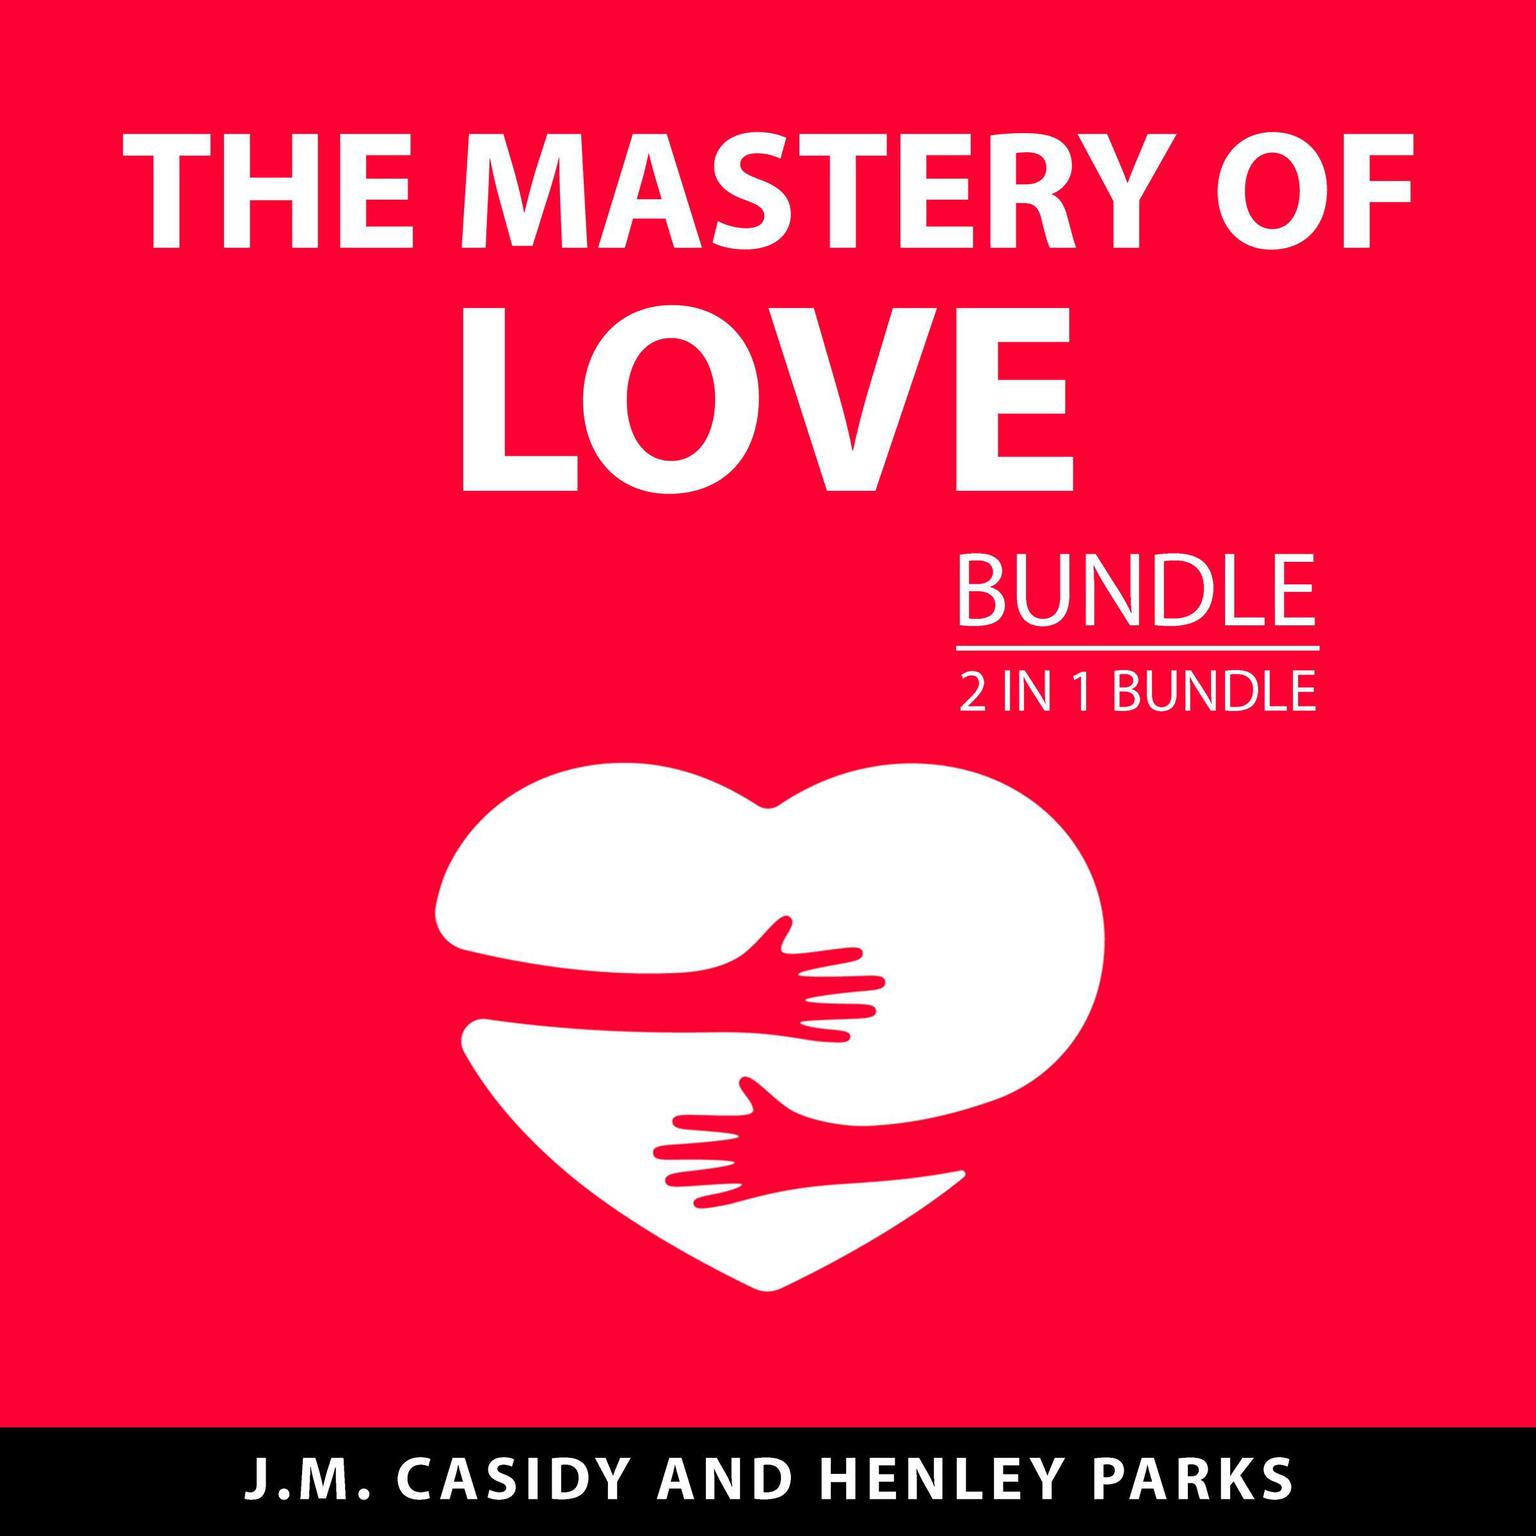 The Mastery of Love Bundle, 2 in 1 Bundle Audiobook, by Henley Parks